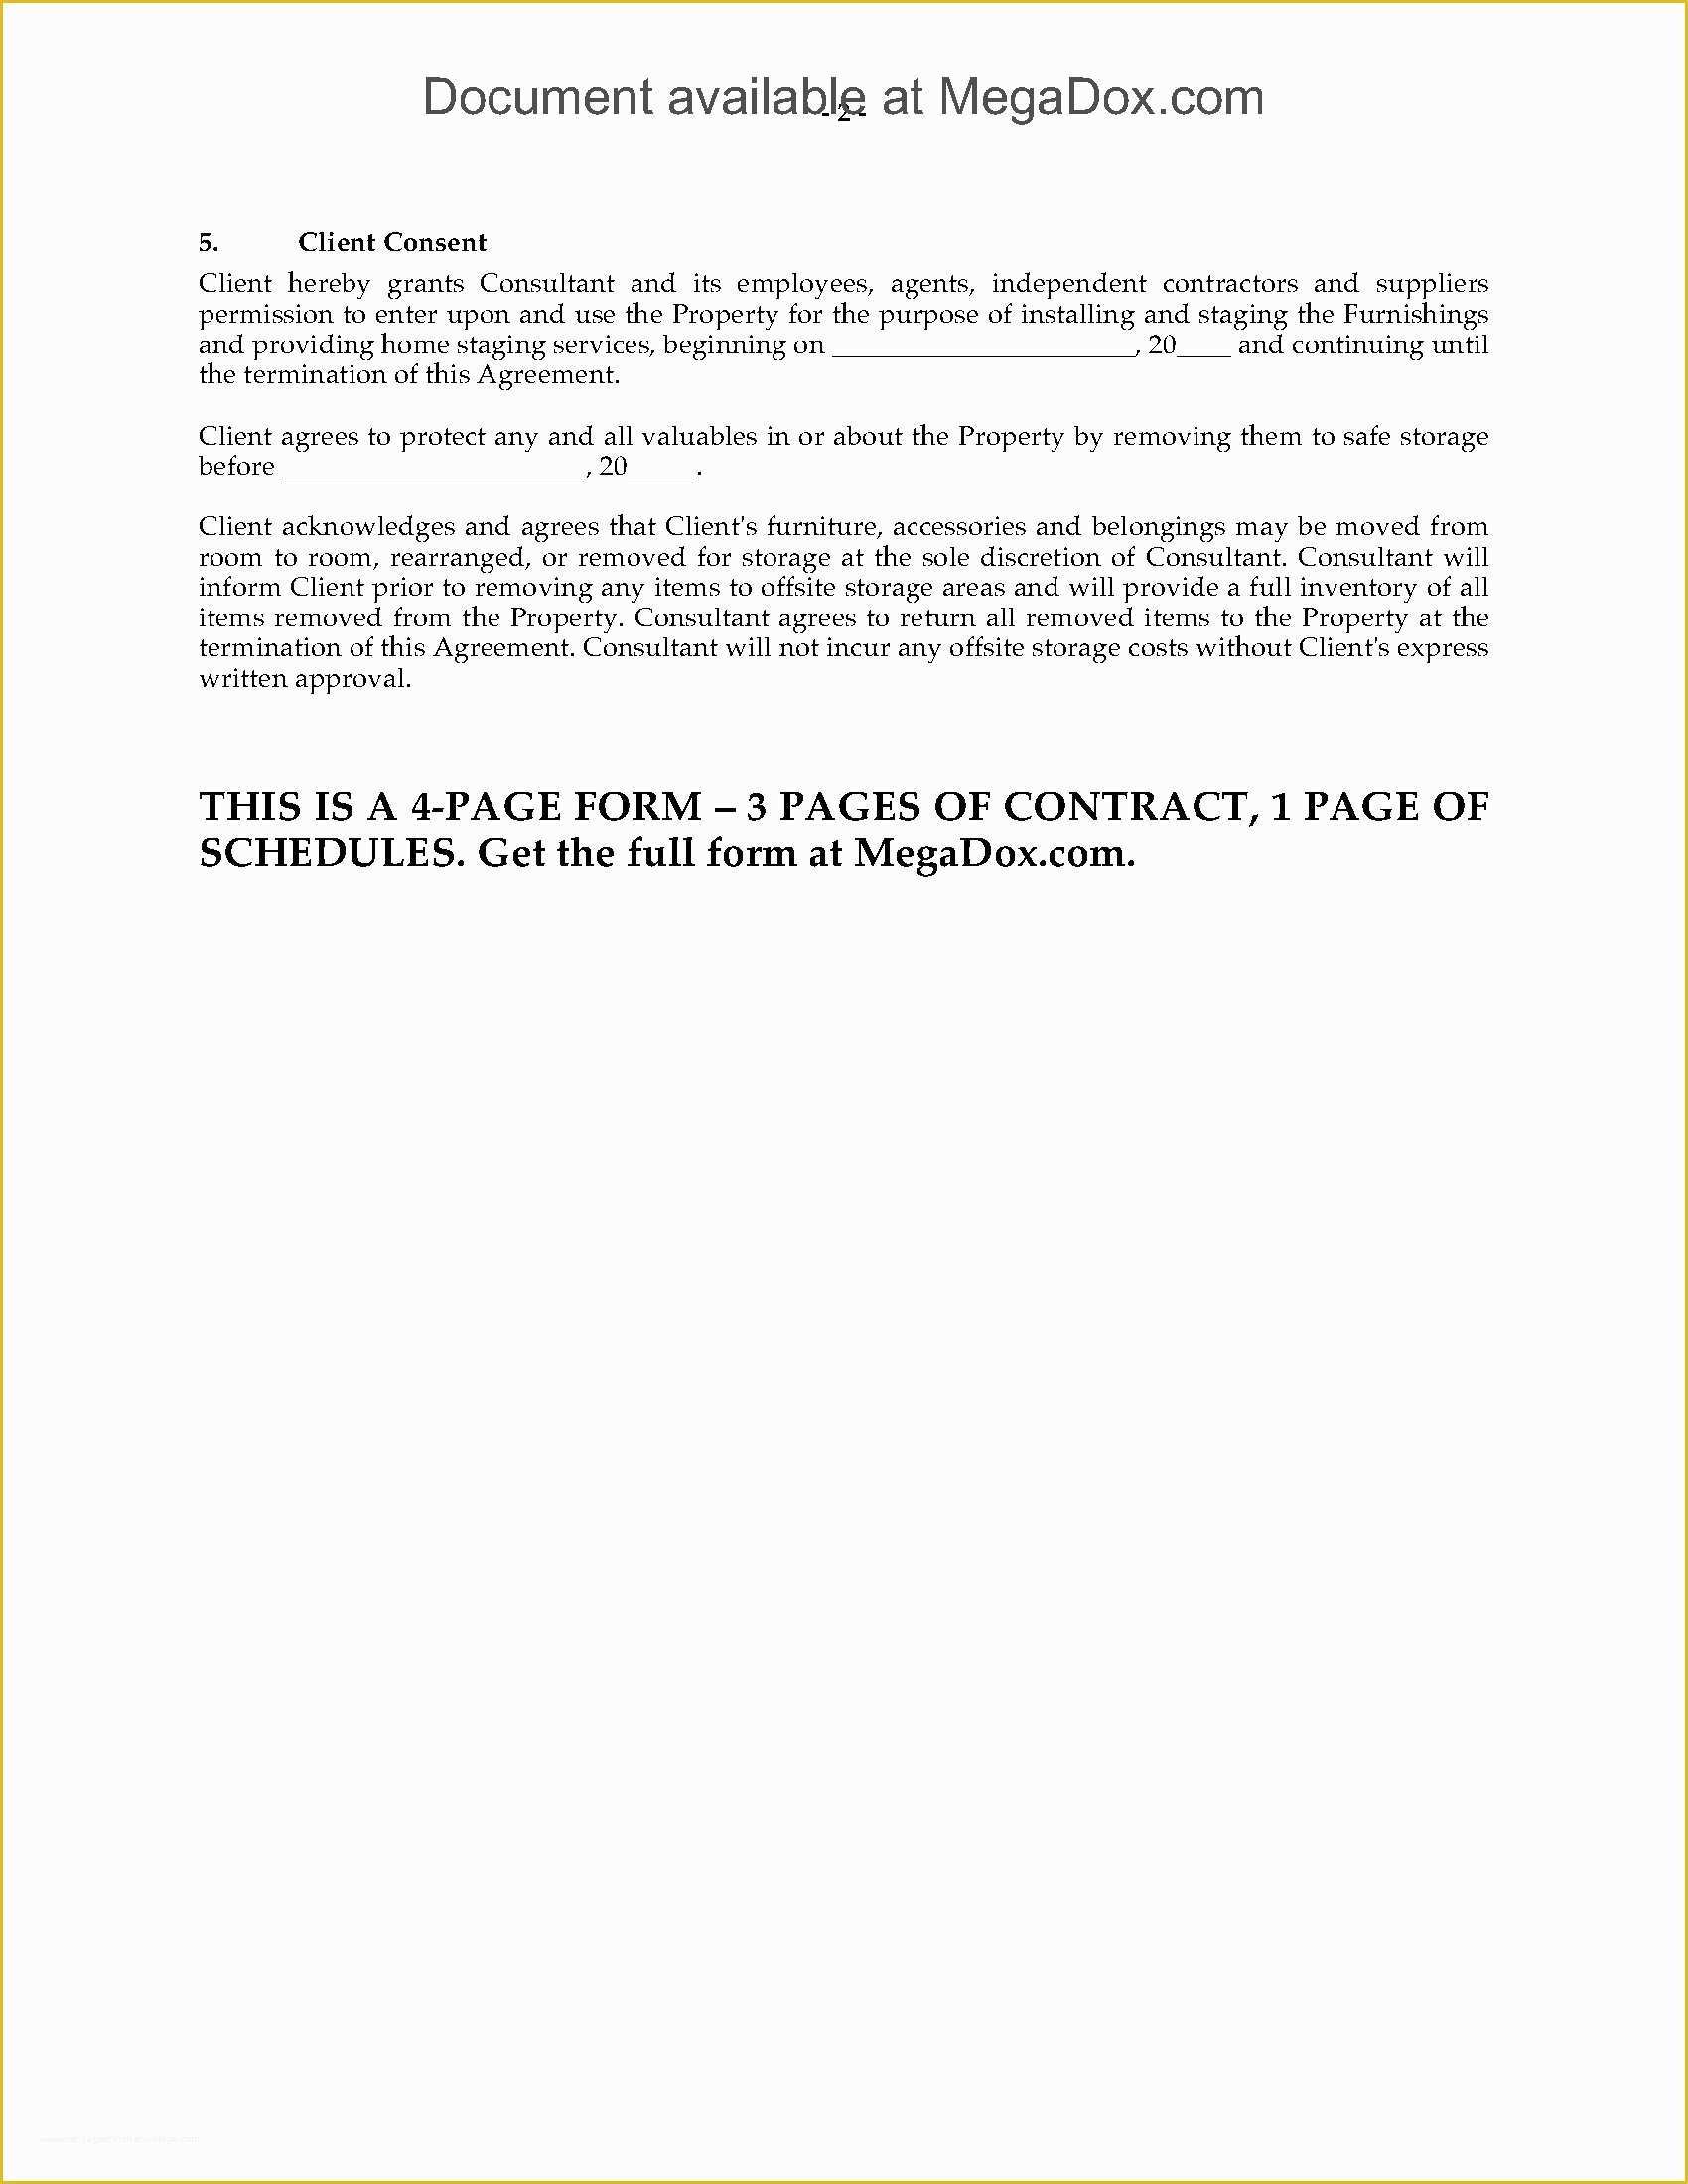 Free Home Staging Contract Template Of Home Staging Furniture Rental Contract